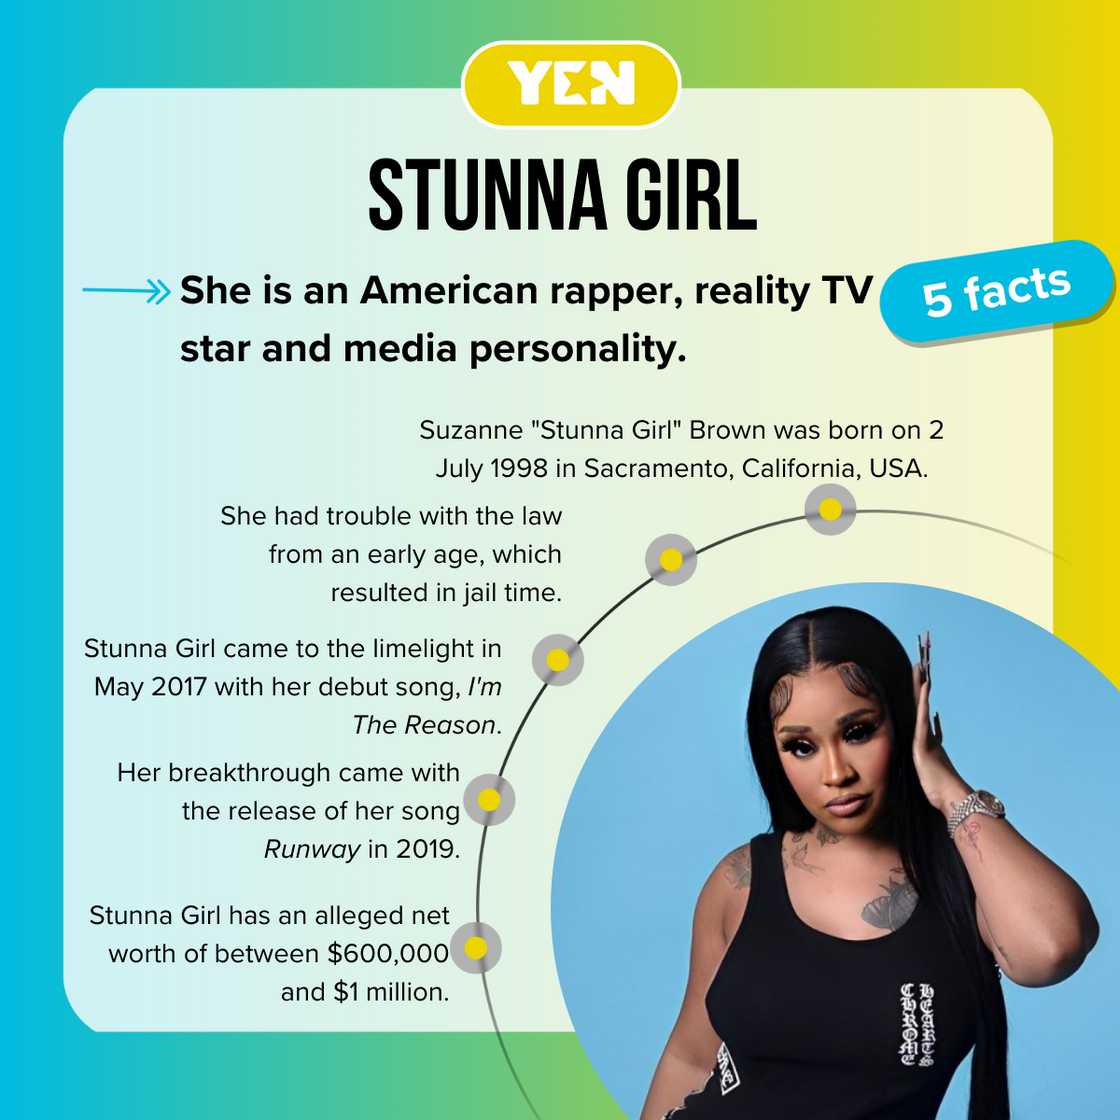 Five facts about Stunna Girl.